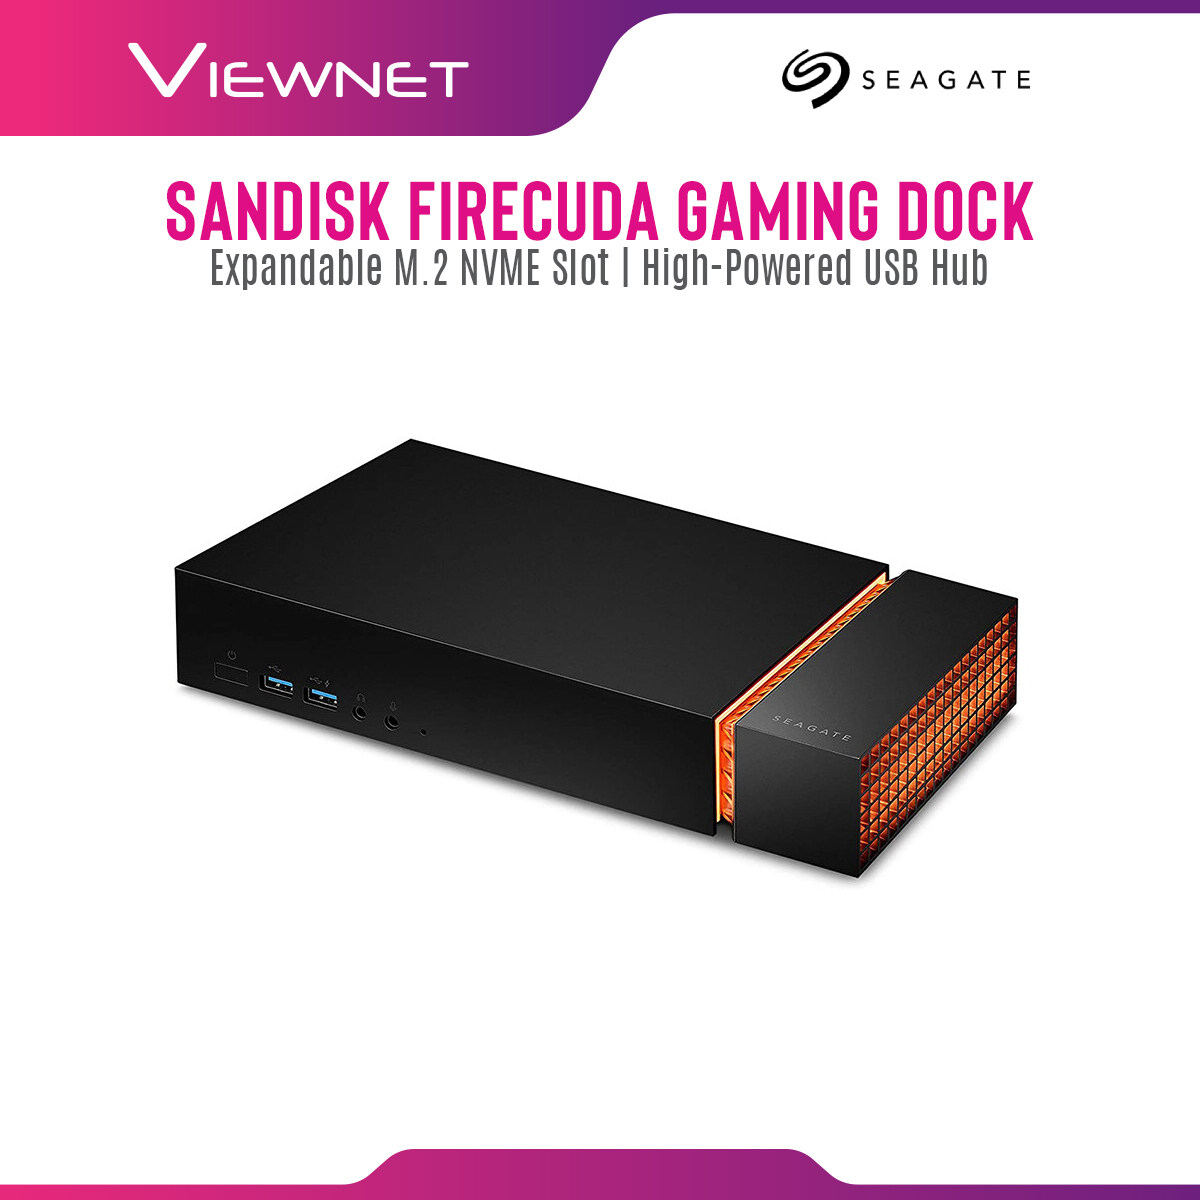 Seagate FireCuda Gaming Dock 4TB with Expandable M.2 NVMe SSD Slot, Customisable RGB LCD Lighting, Thunderbolt 3 Powered USB Hub